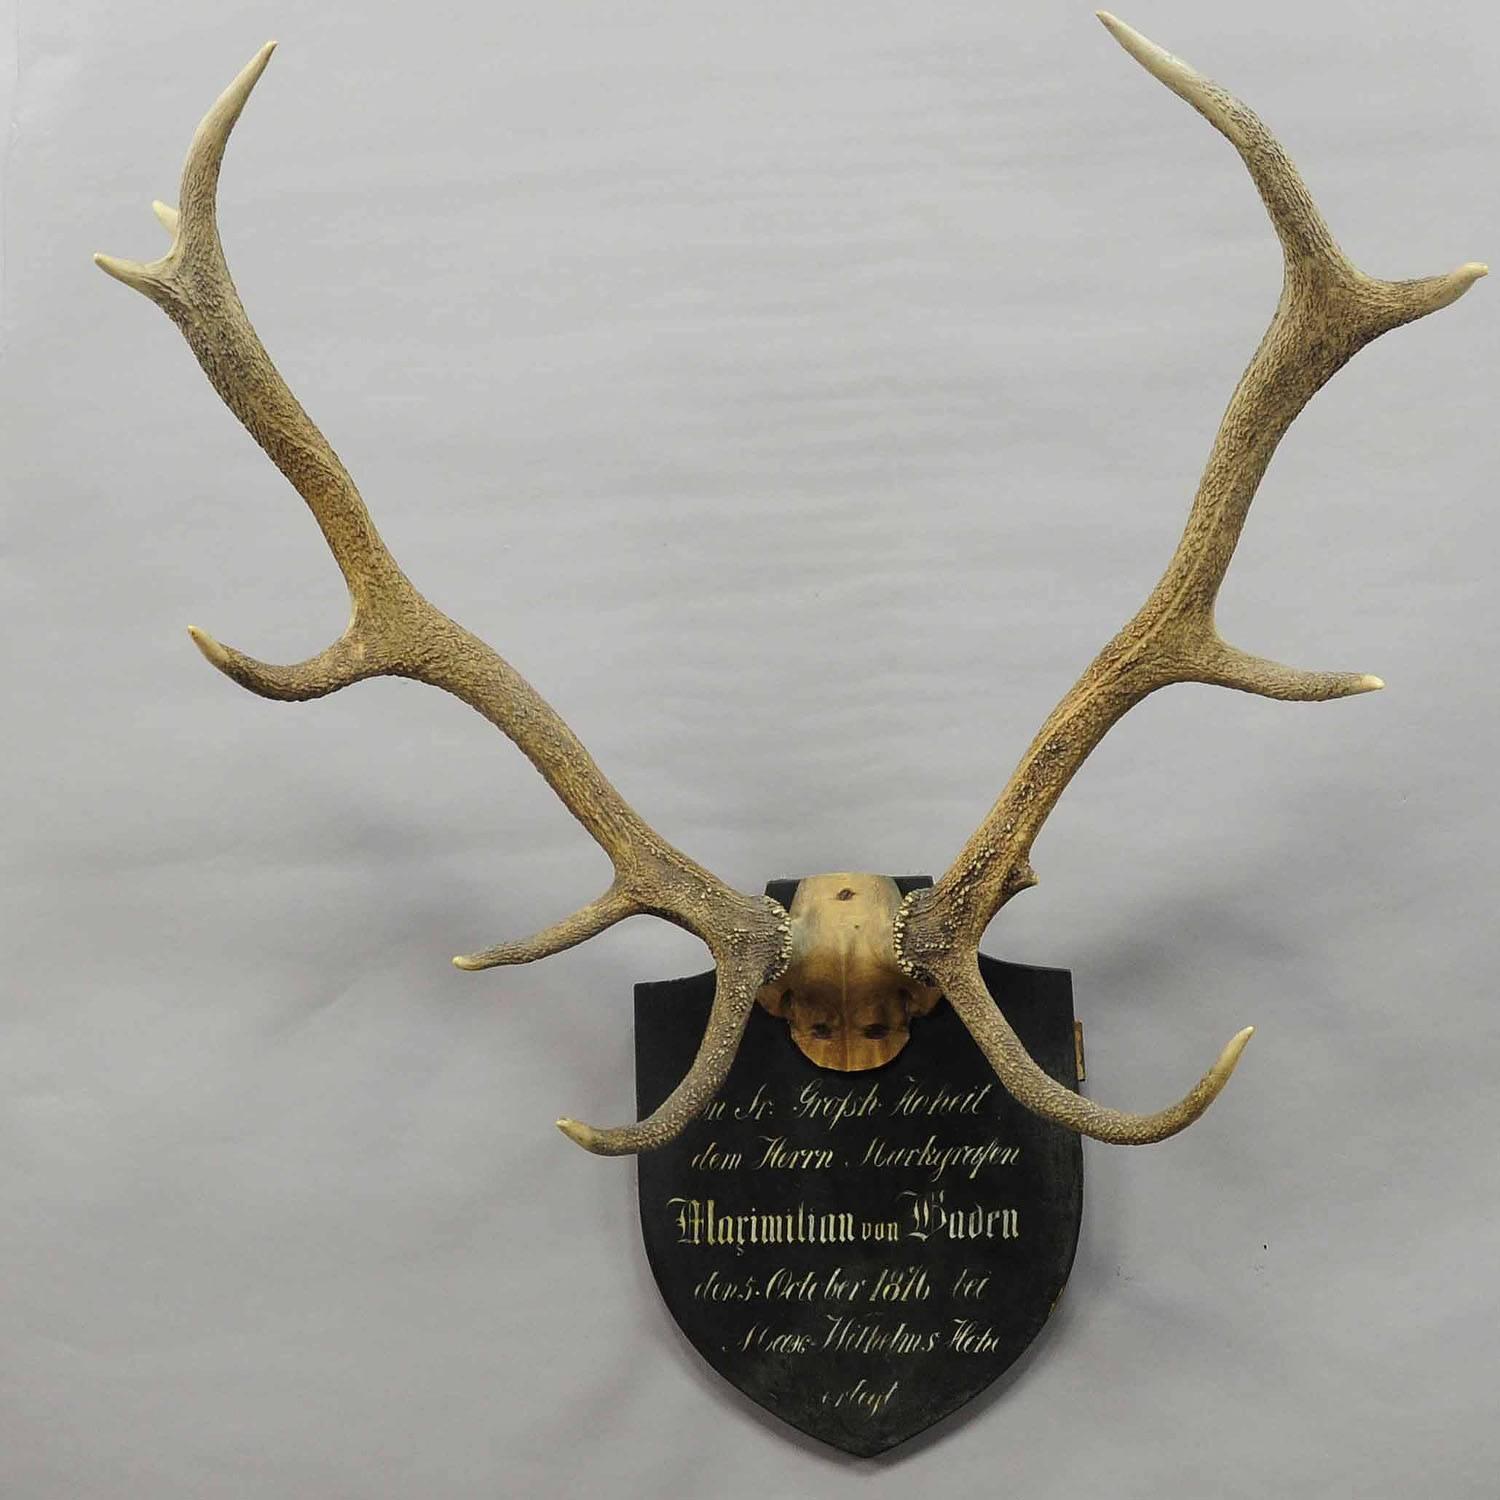 A great manorial antique Black Forest deer trophy from the palace of Salem in South Germany. Shoot by margrave Maximilian of Baden in 1876. Handwritten inscriptions on the wooden plaque with, name, place of the hunt and date 1876. The antlers are